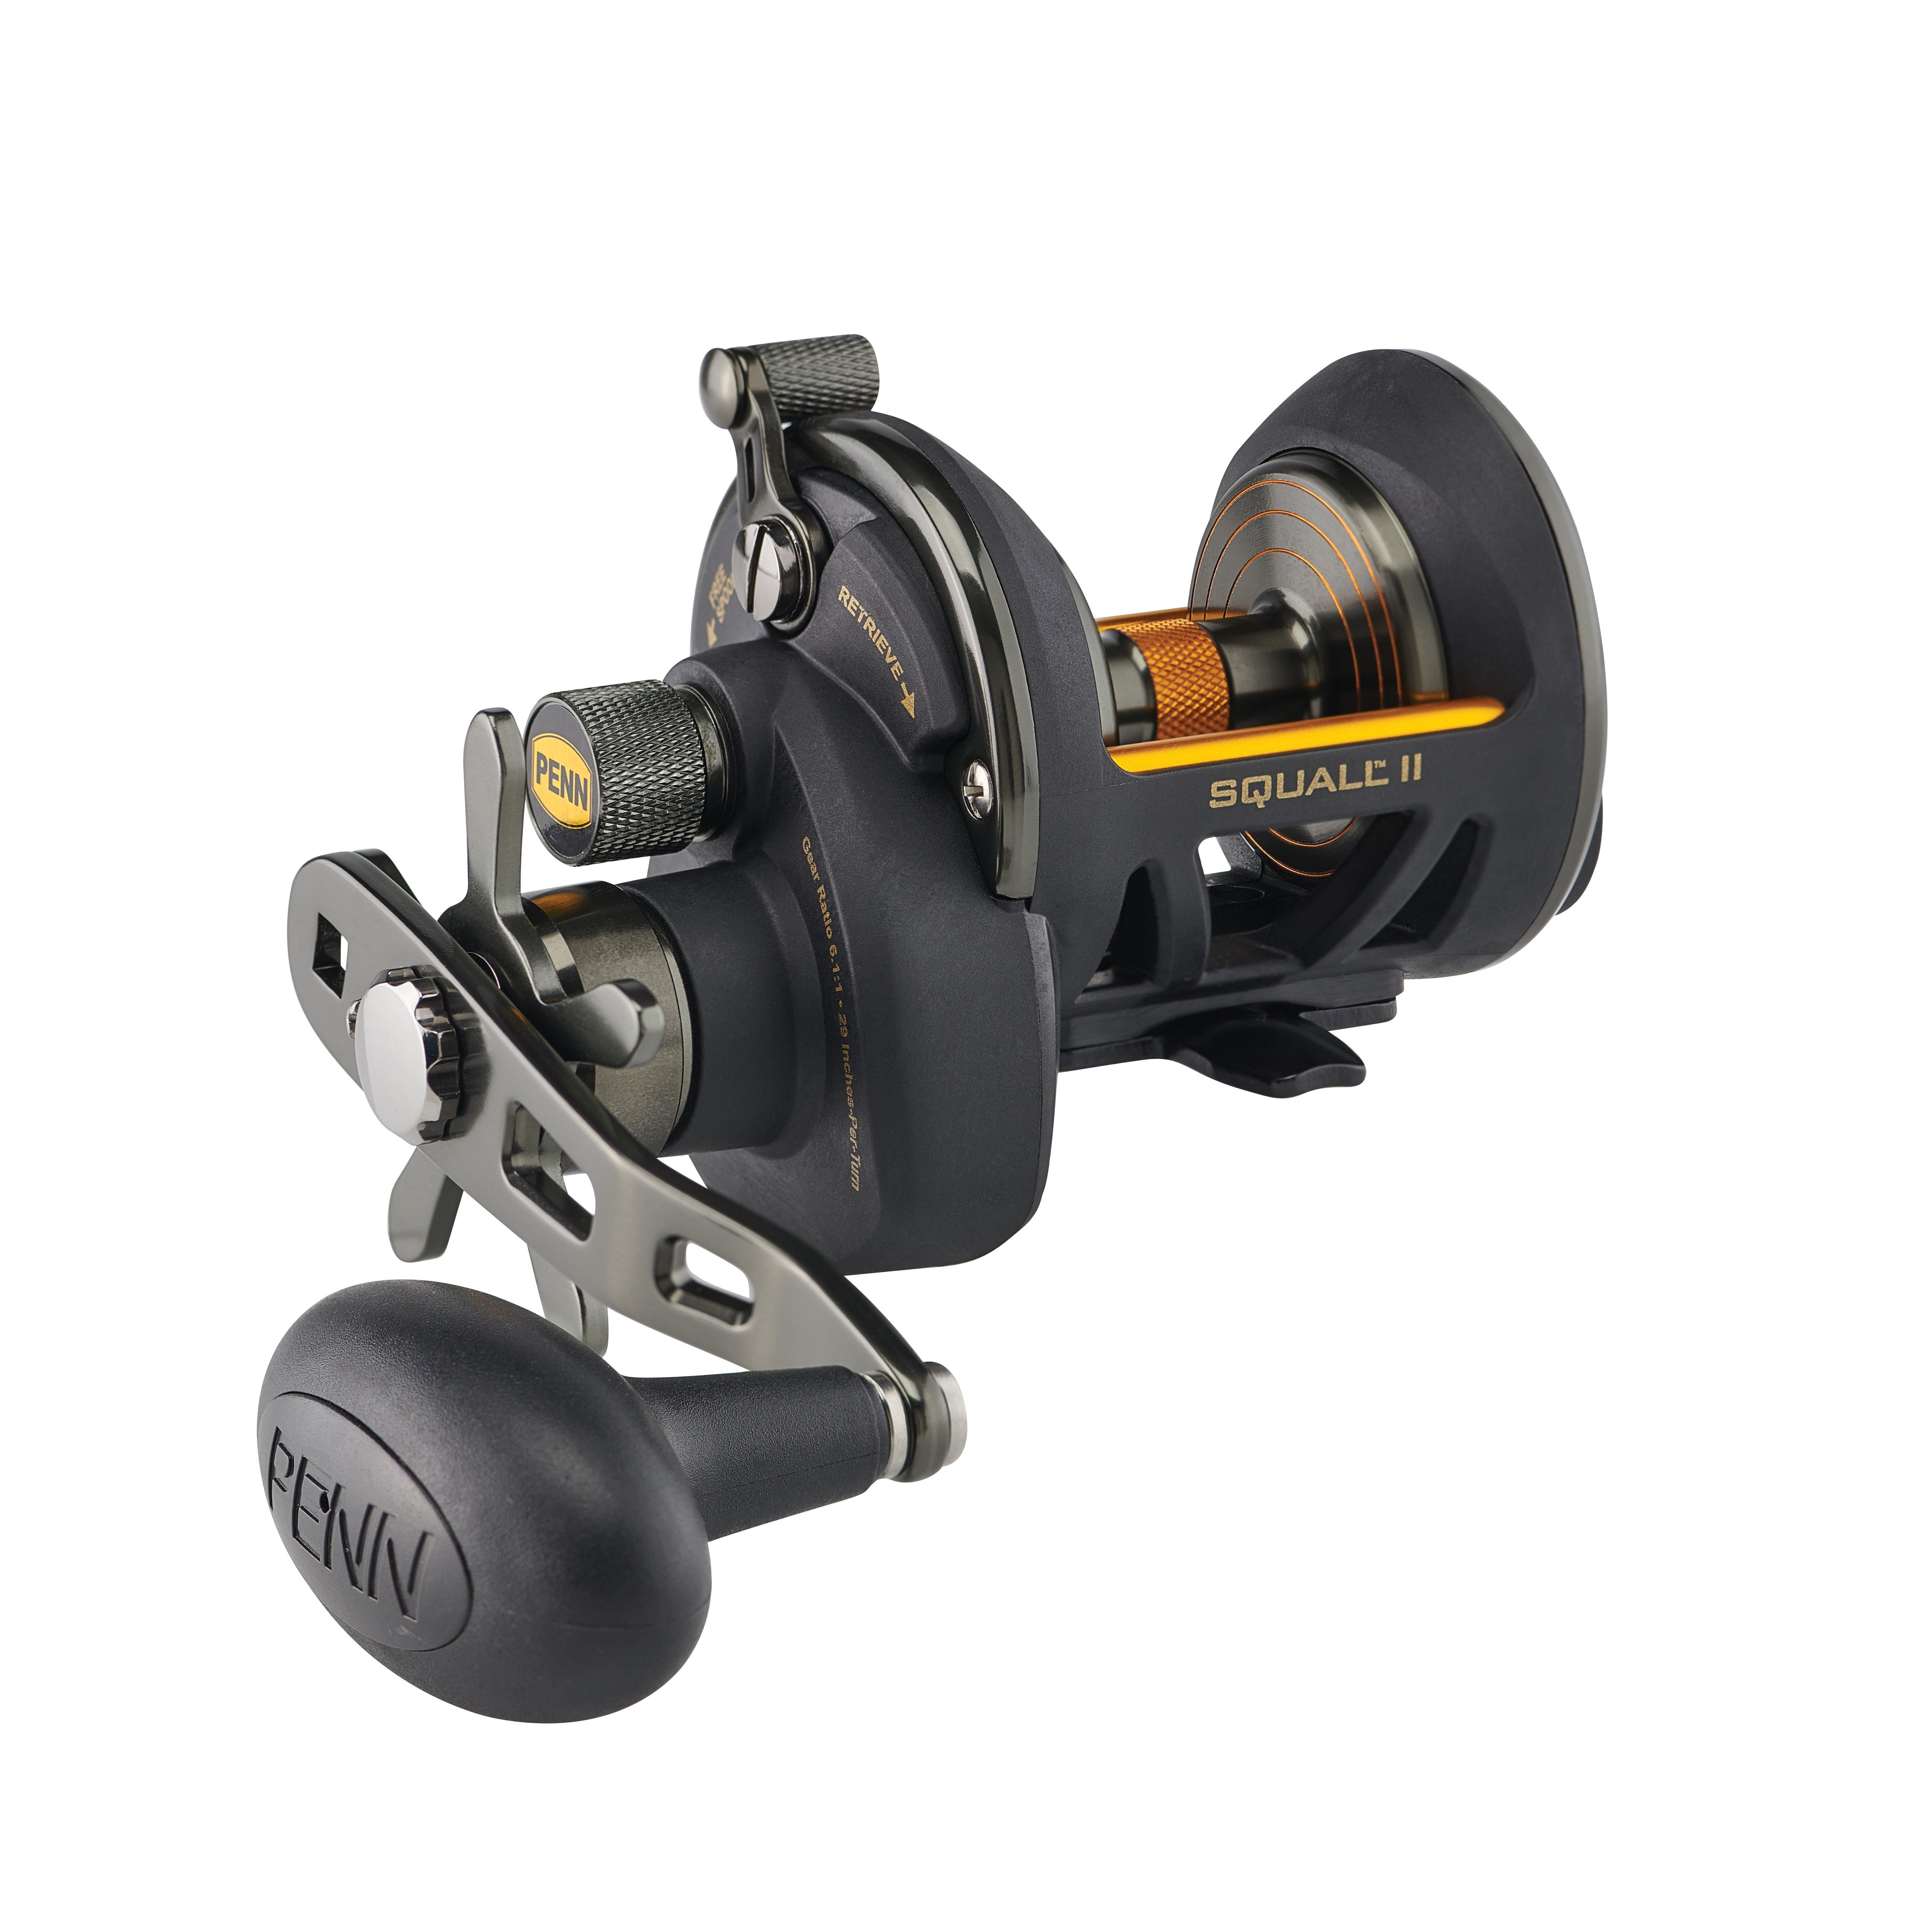 PENN Squall II Star Drag Conventional Reel, Size 15, 31 Recovery Rate 